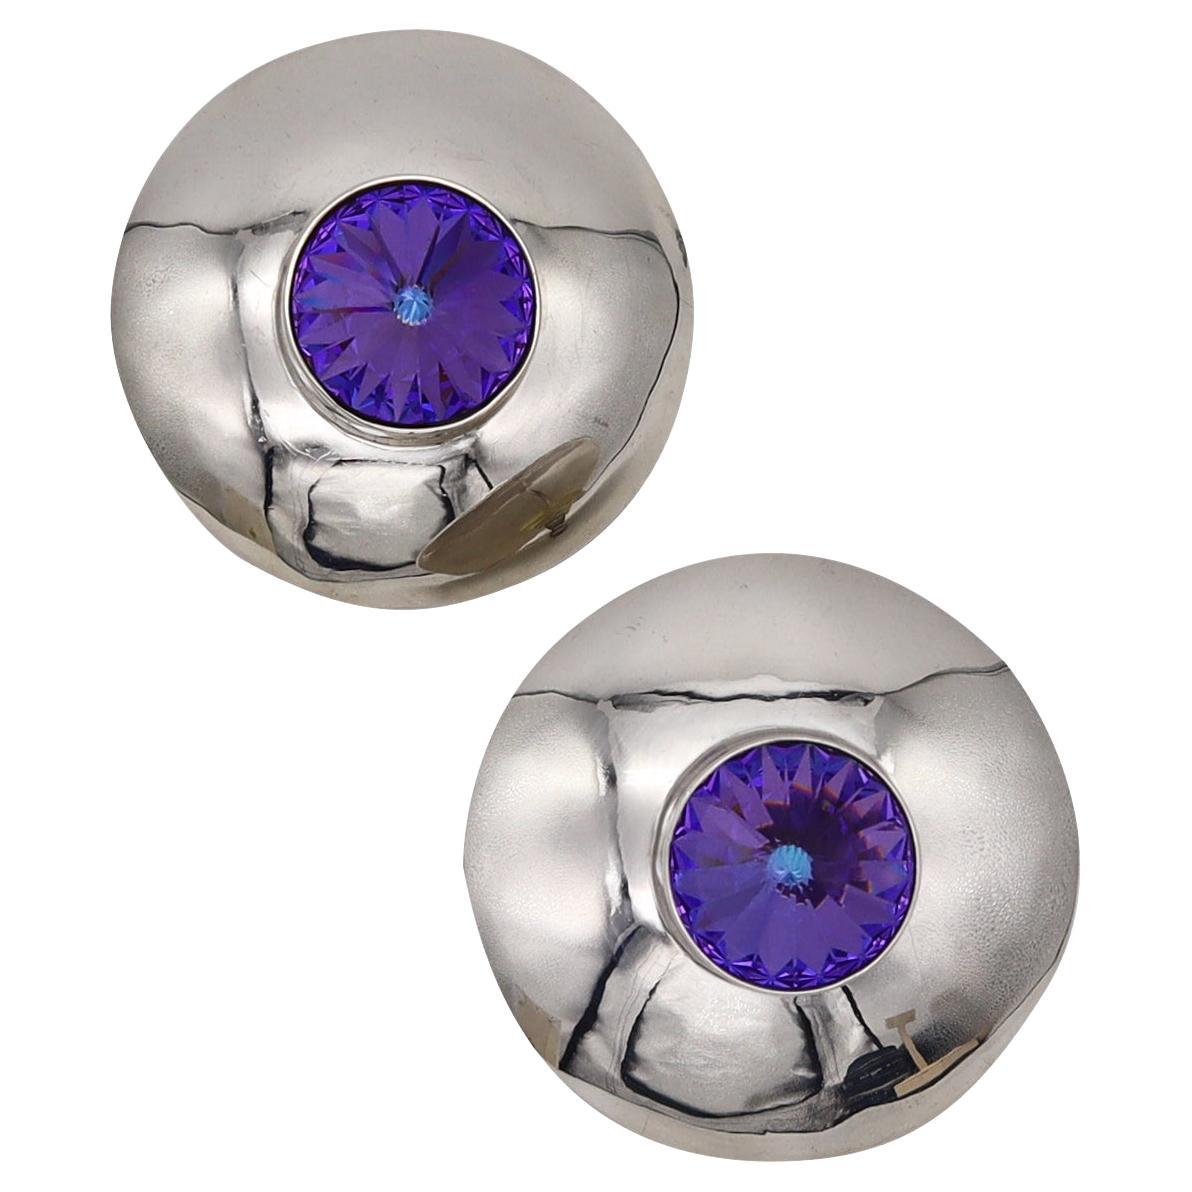 Mexico 1970 Taxco Retro Modernist Earrings In Sterling Silver With Purple Glass For Sale